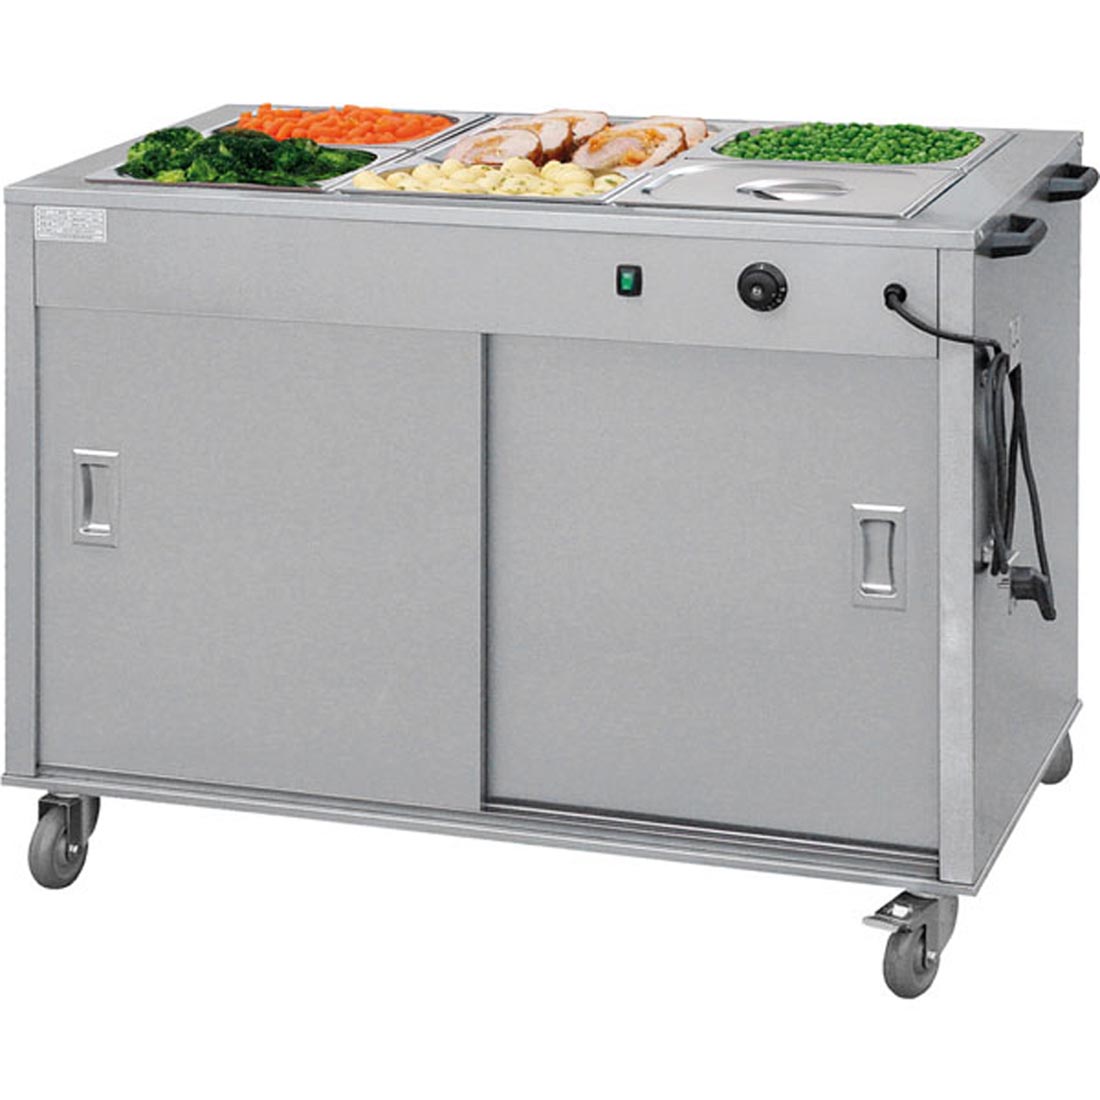 YC-3 Food Service Cart, Chilled